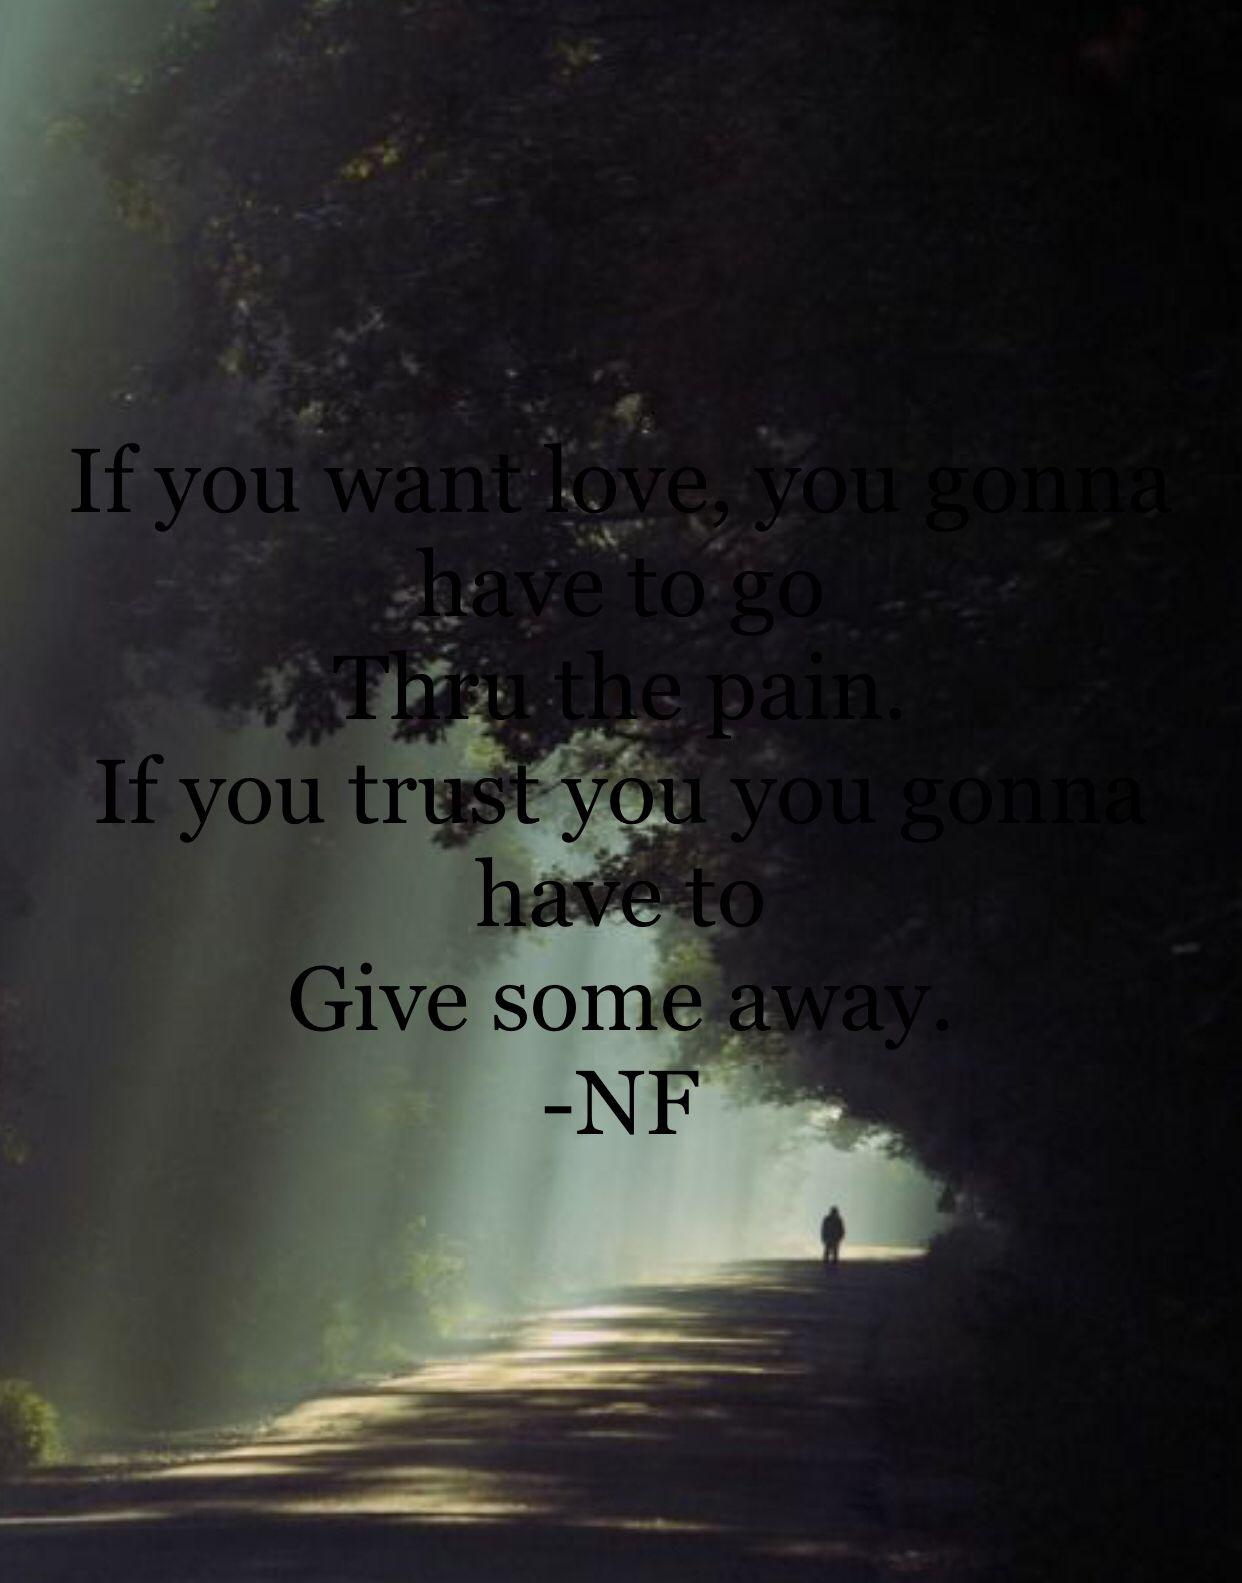 NF quote. MUSIC. Nf quotes, Movie posters, Trust yourself